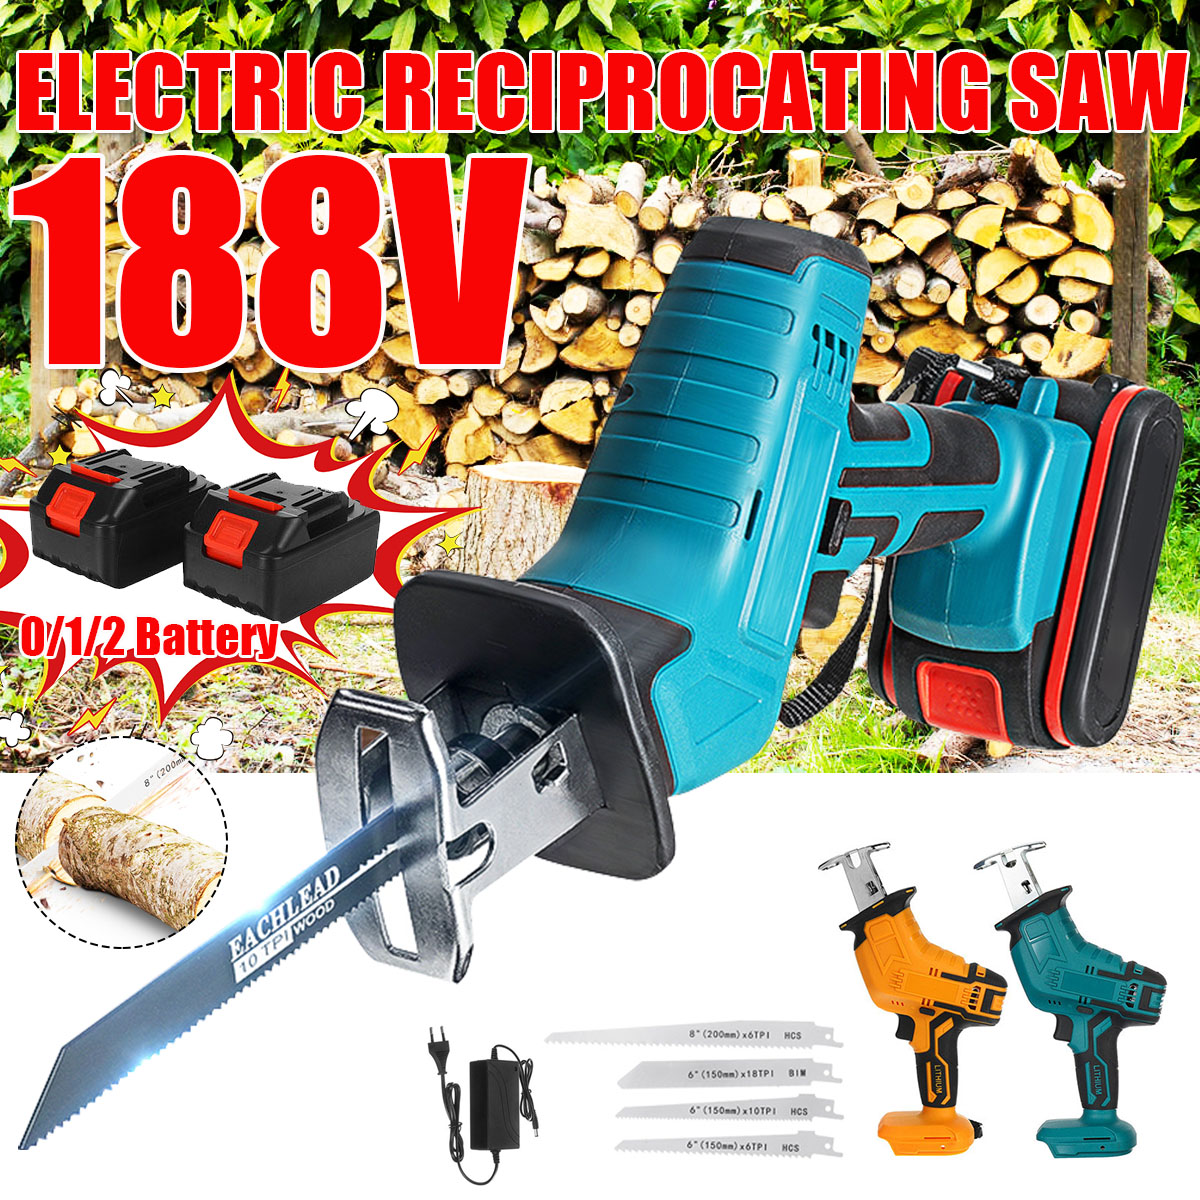 Rechargeable-Cordless-Reciprocating-Saw-Handheld-Woodorking-Wood-Cutter-W-None12-Battery--4PCS-Saw-B-1879912-1